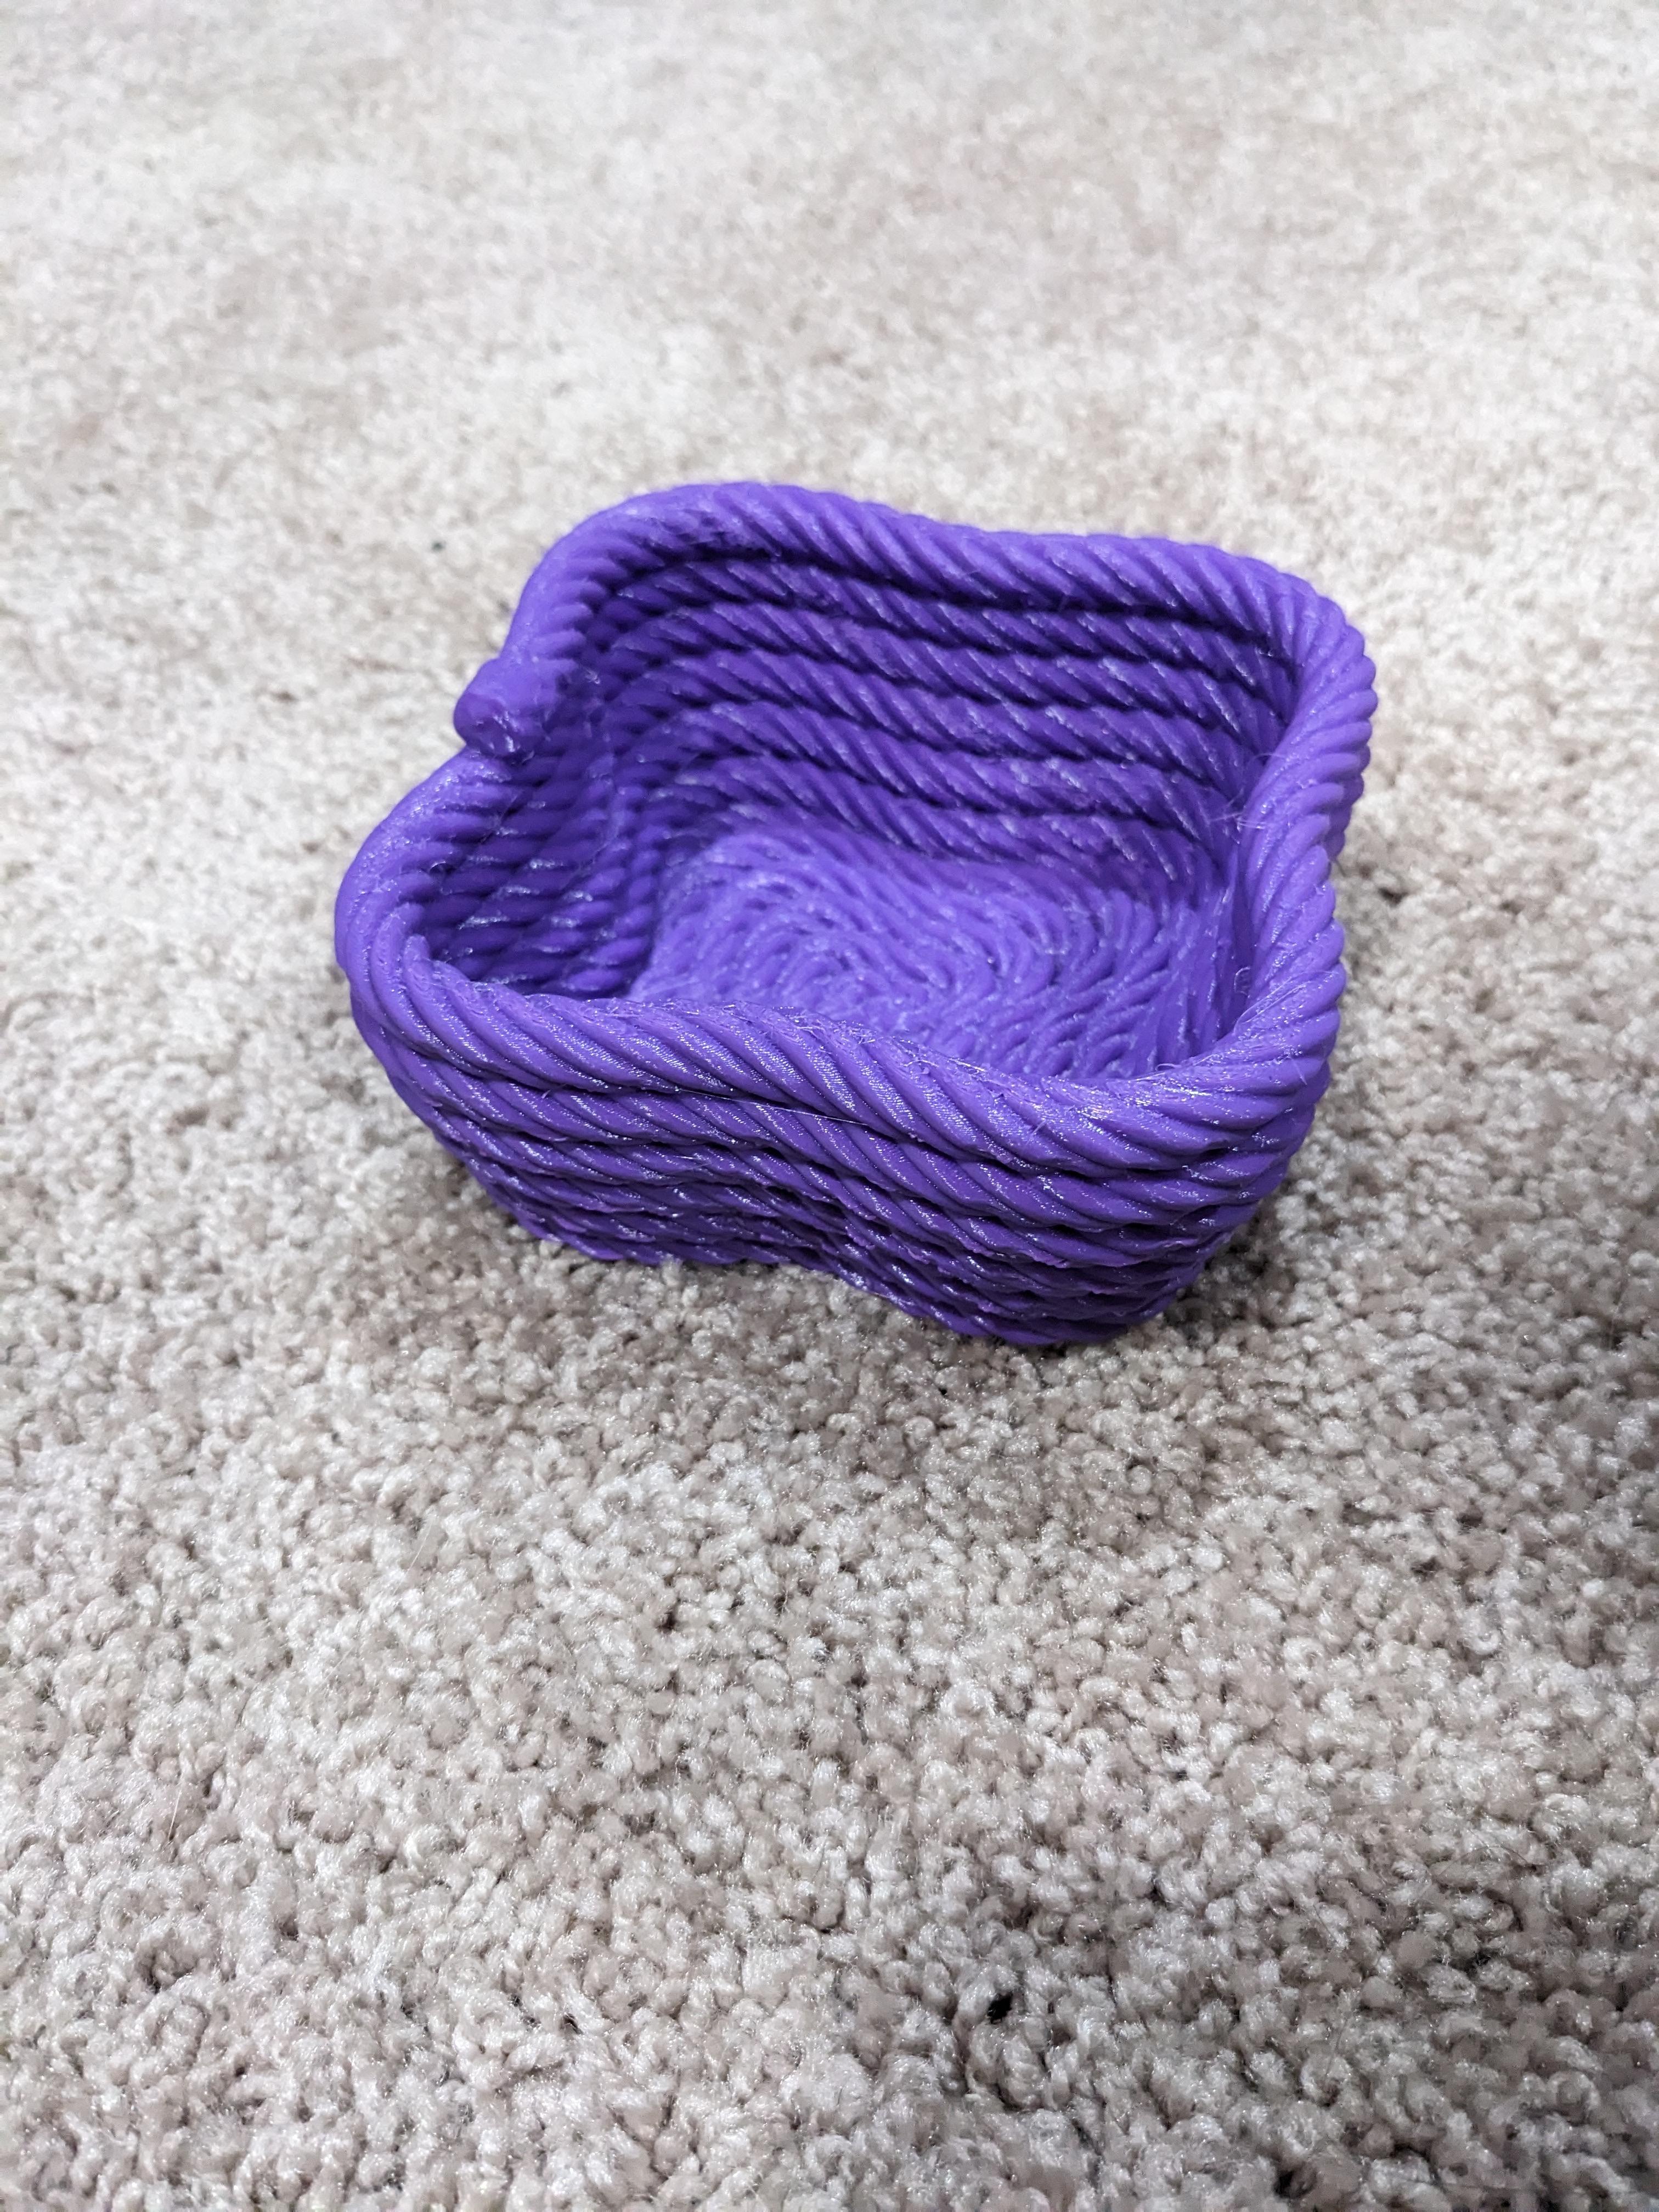 Four Corner Coiled Rope Bowl - I made this out of 95A TPU with 8% cubic infill, and it turned out pretty well! My printer settings weren't quite perfect, but its still a fun thing to squish :P - 3d model